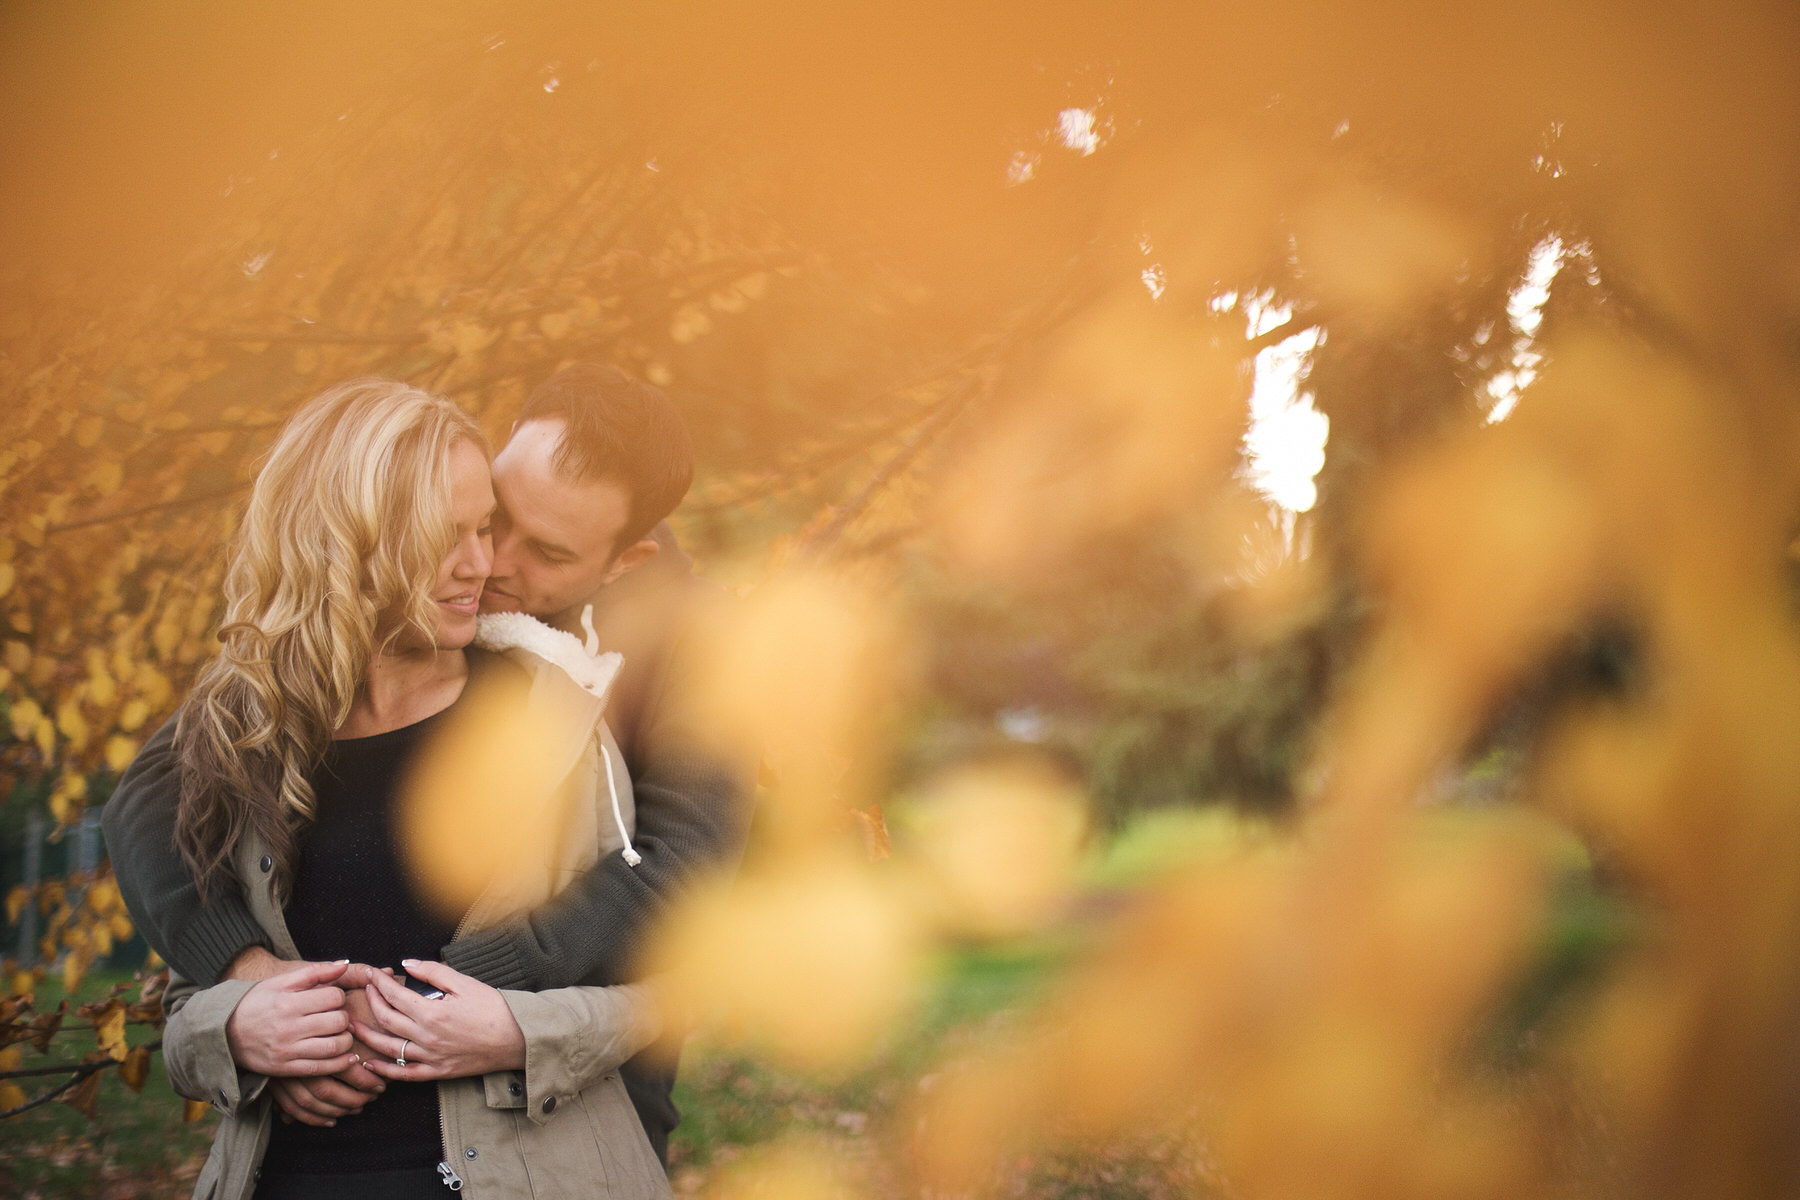 Fall Wedding and Engagement Inspiration